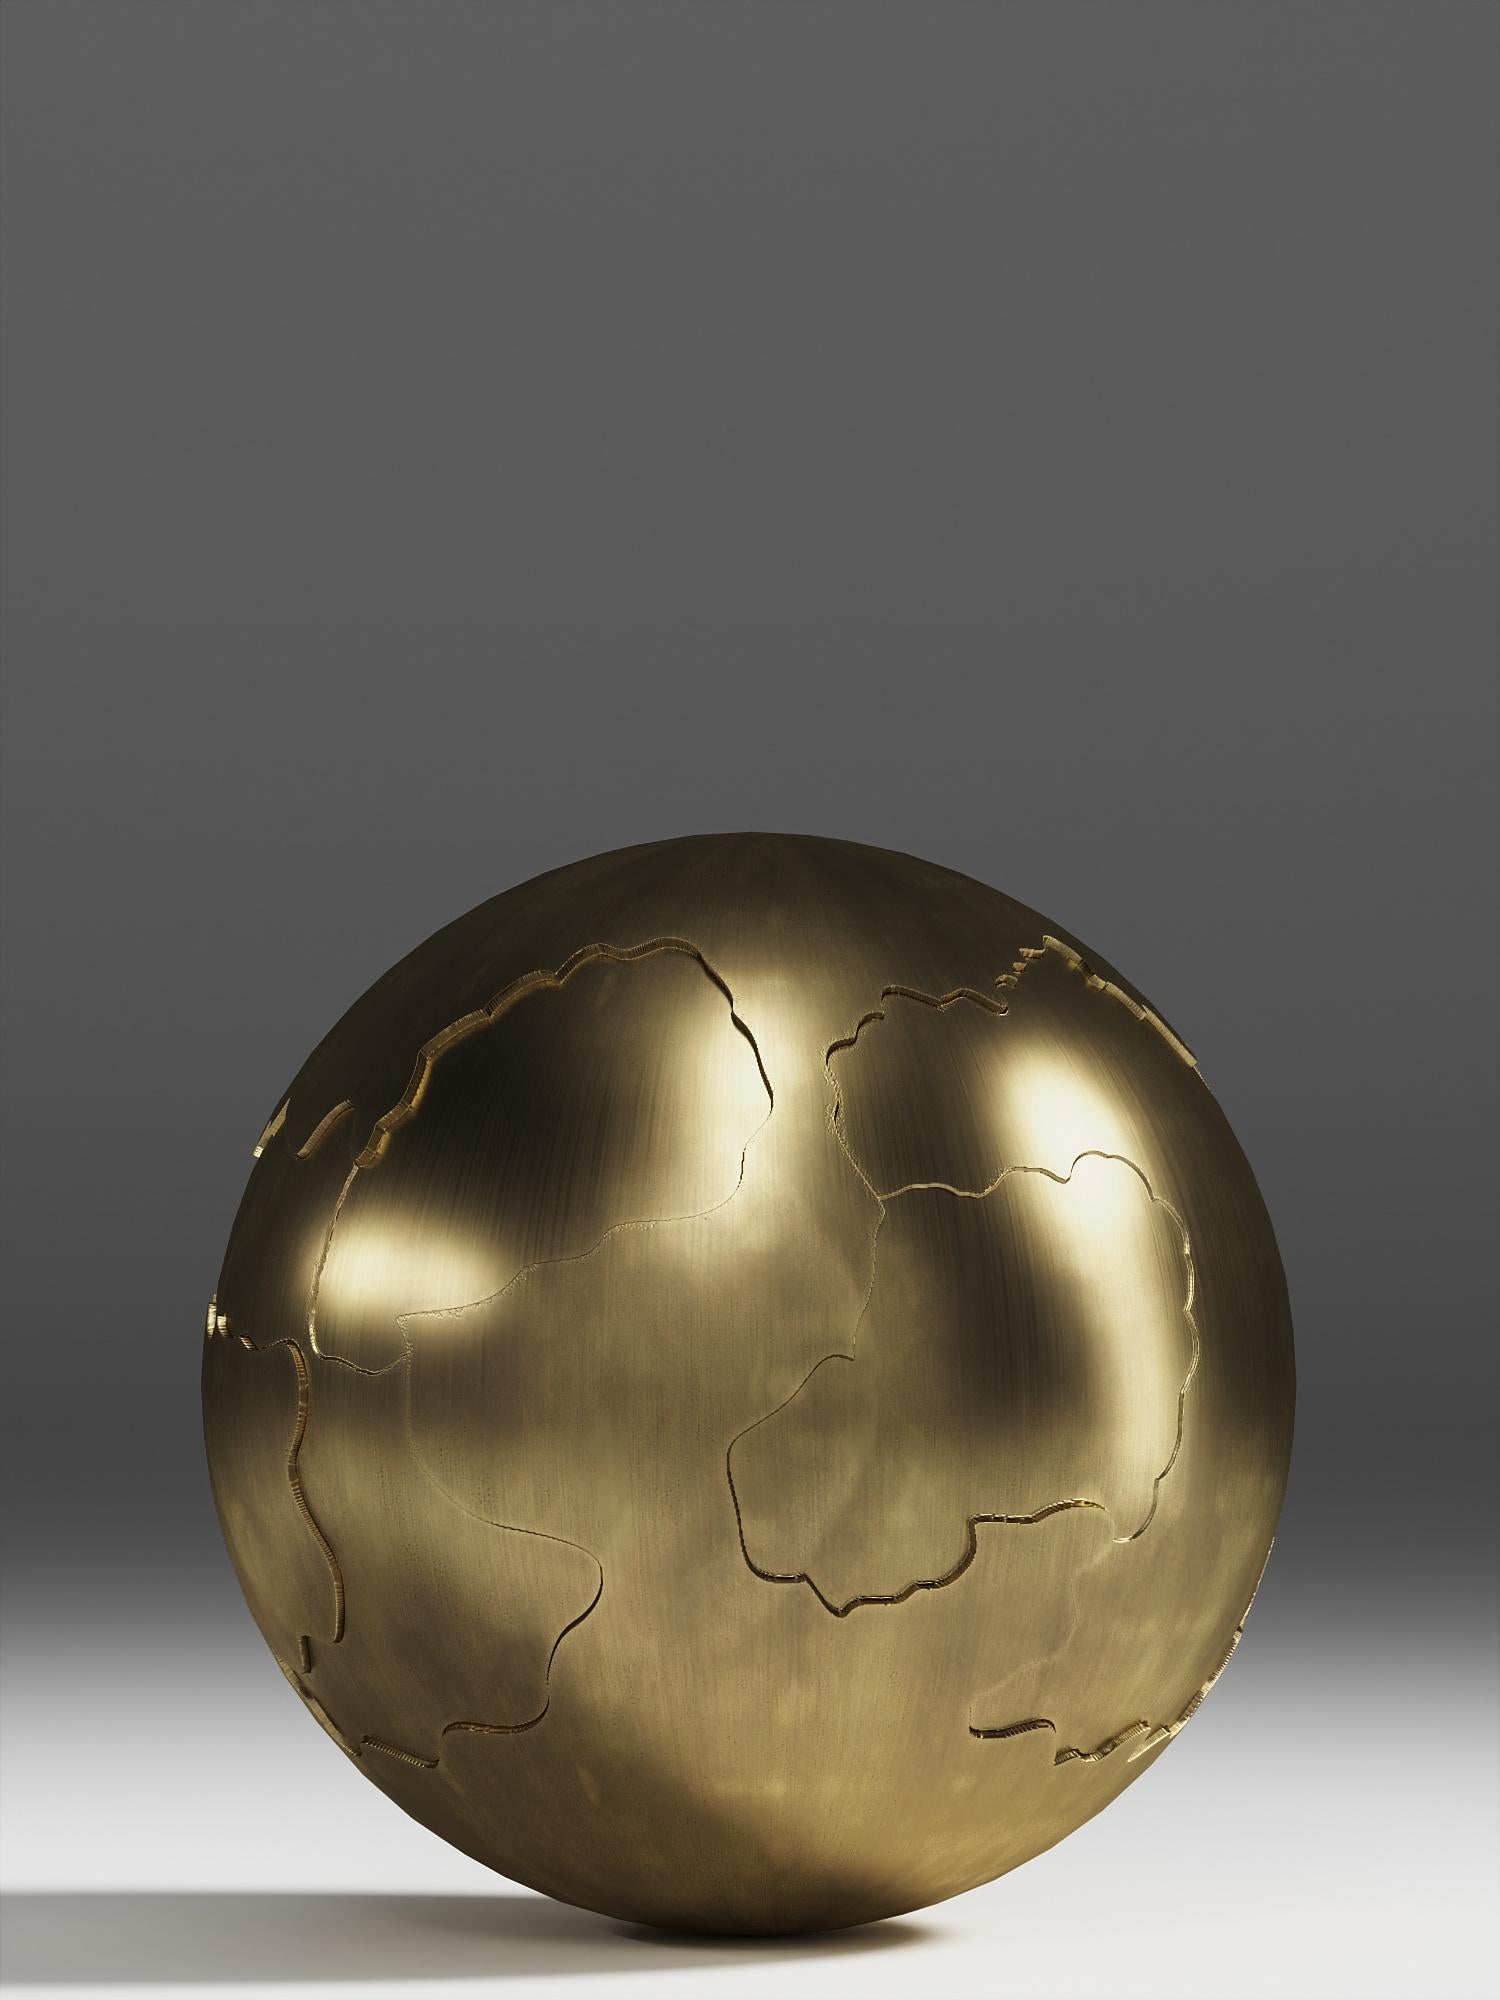 Patrick Coard Paris launches a unique and beautiful sculptural object collection. The set of 4 spheres are done completely in bronze-patina brass with subtle hand carved indentations to create a camouflage pattern. This listing is for the set of 4,